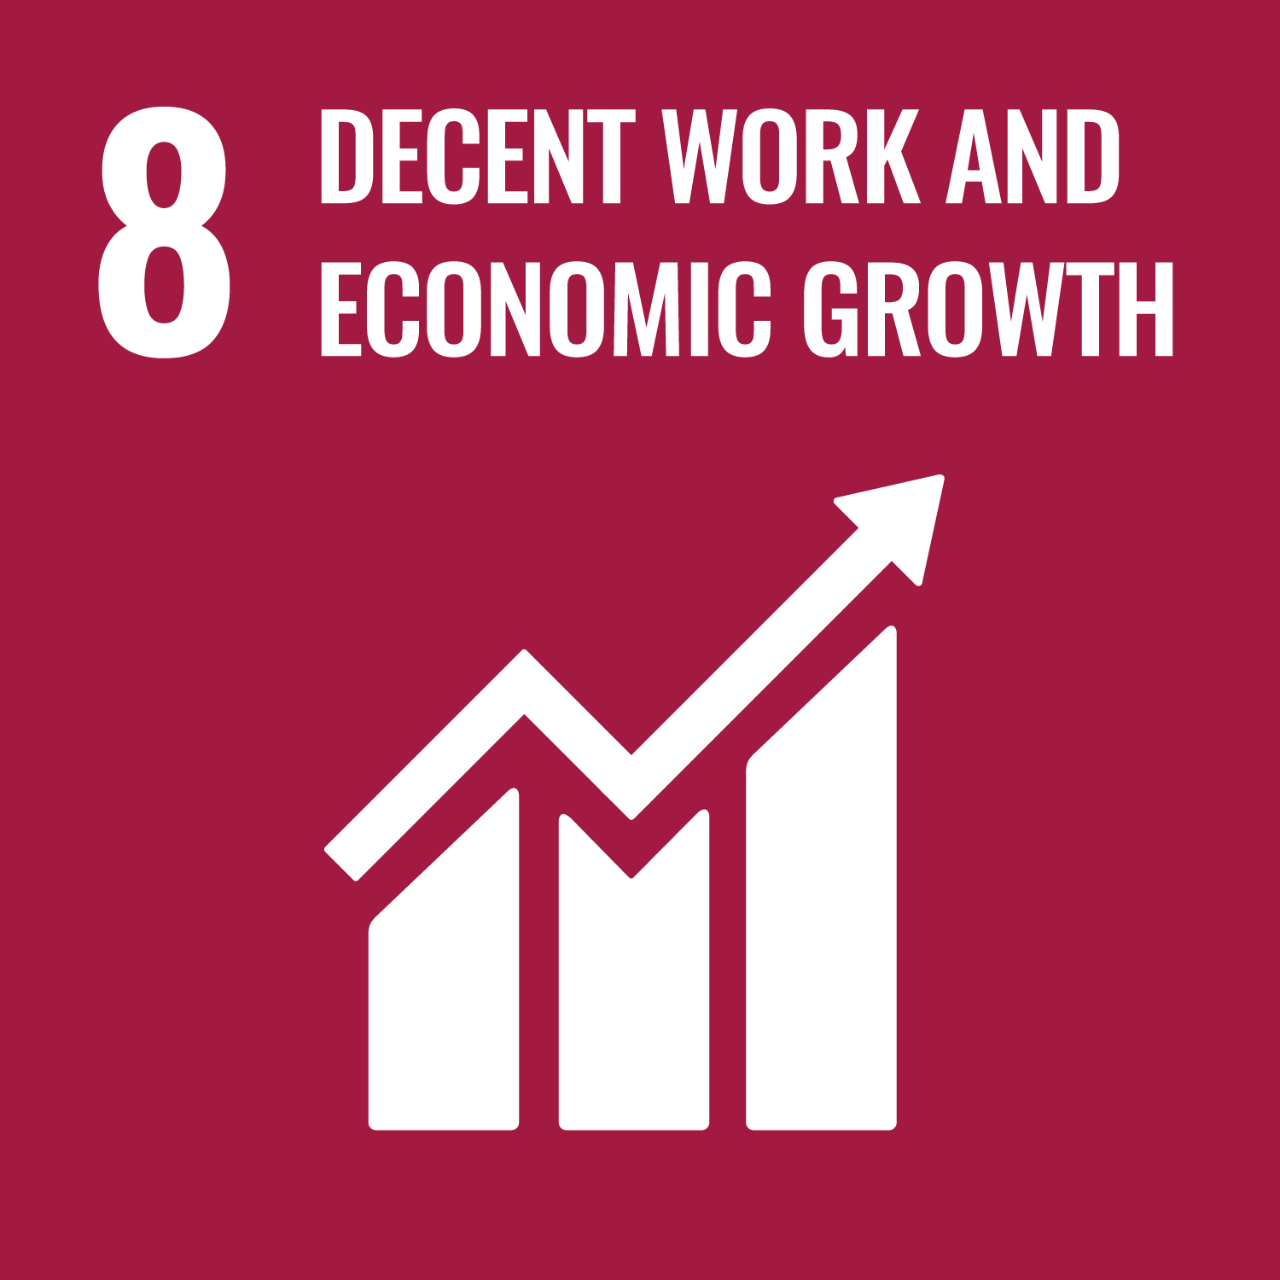 Dark red icon with graphic of growth chart to represent UNSDG Goal 8: Decent Work and Economic Growth.